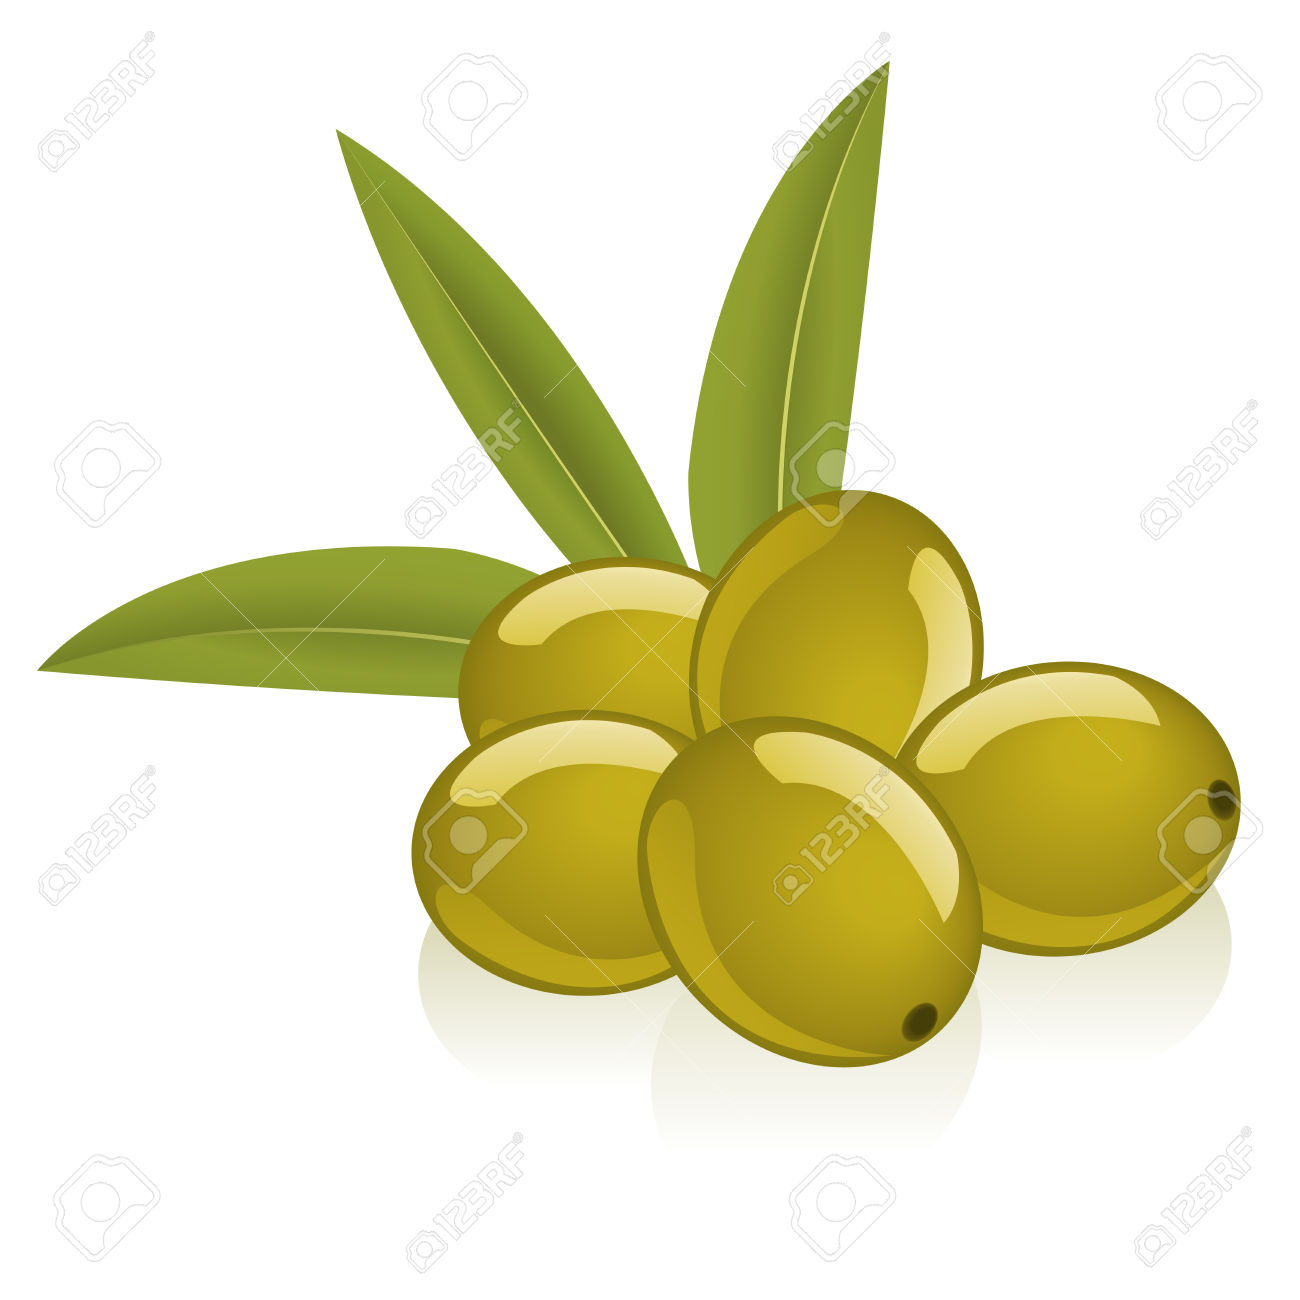 ... Olives - Olive Branch and